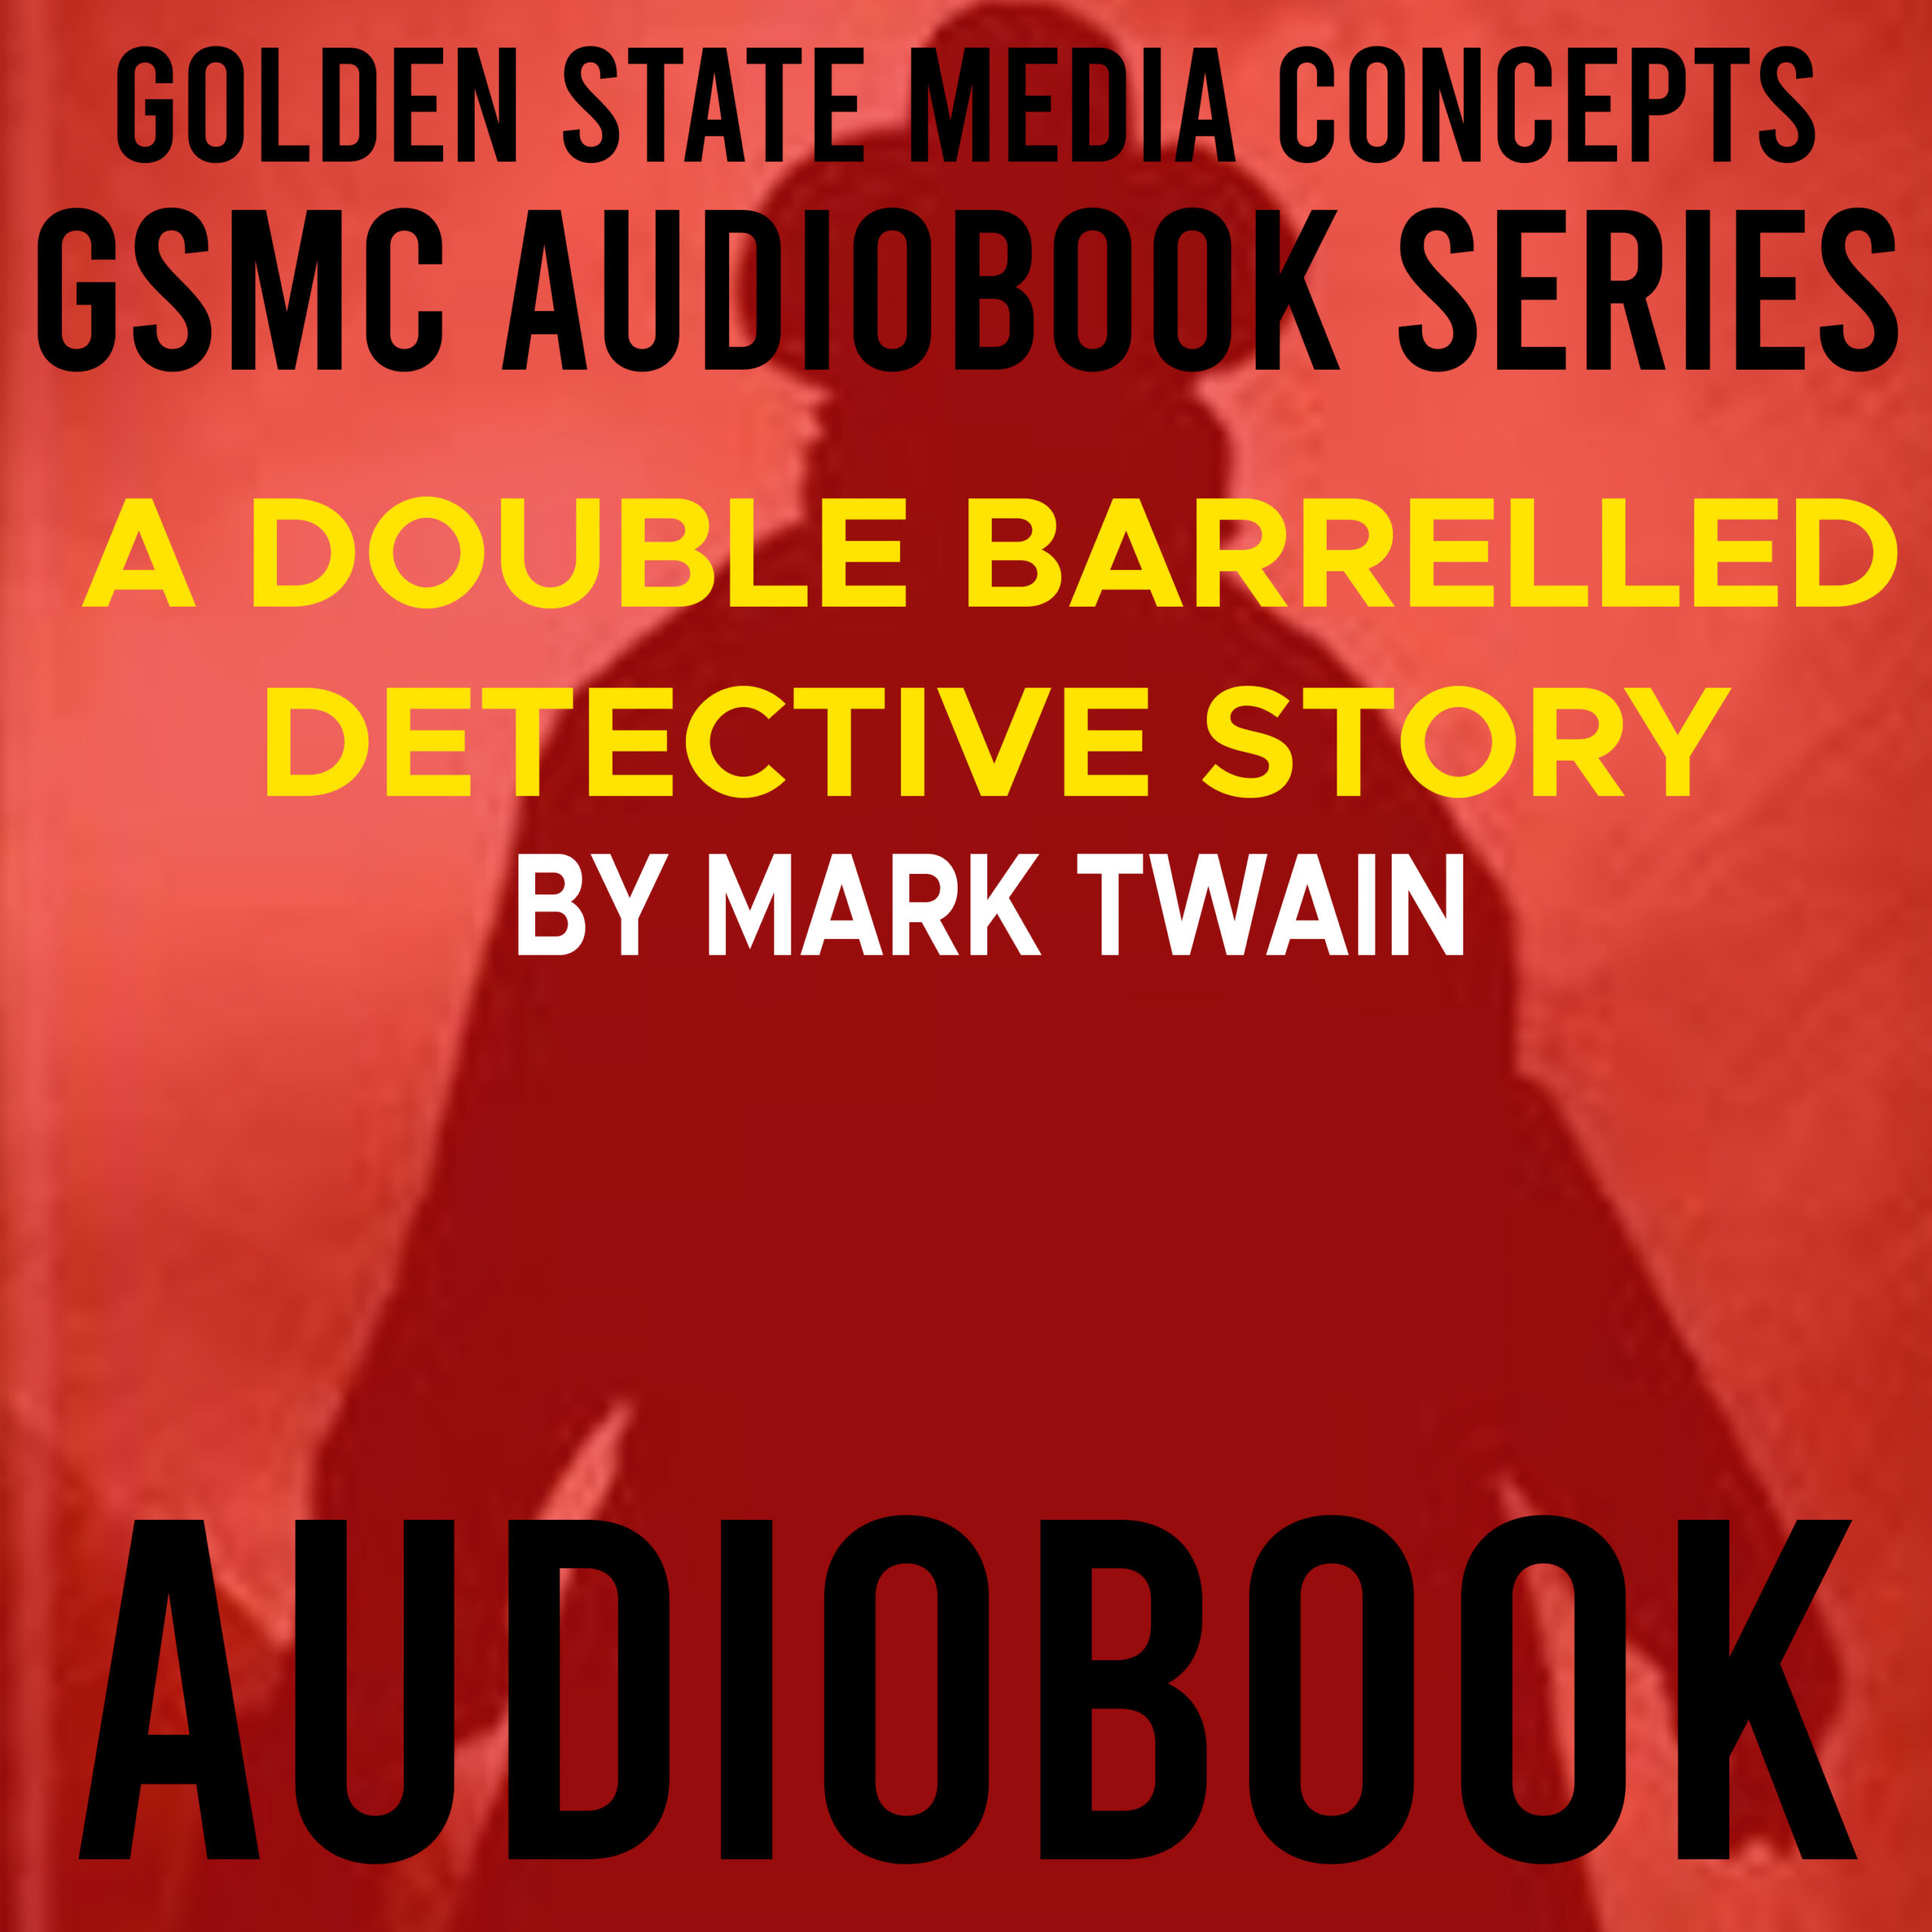 GSMC Audiobook Series: A Double Barrelled Detective Story by Mark Twain